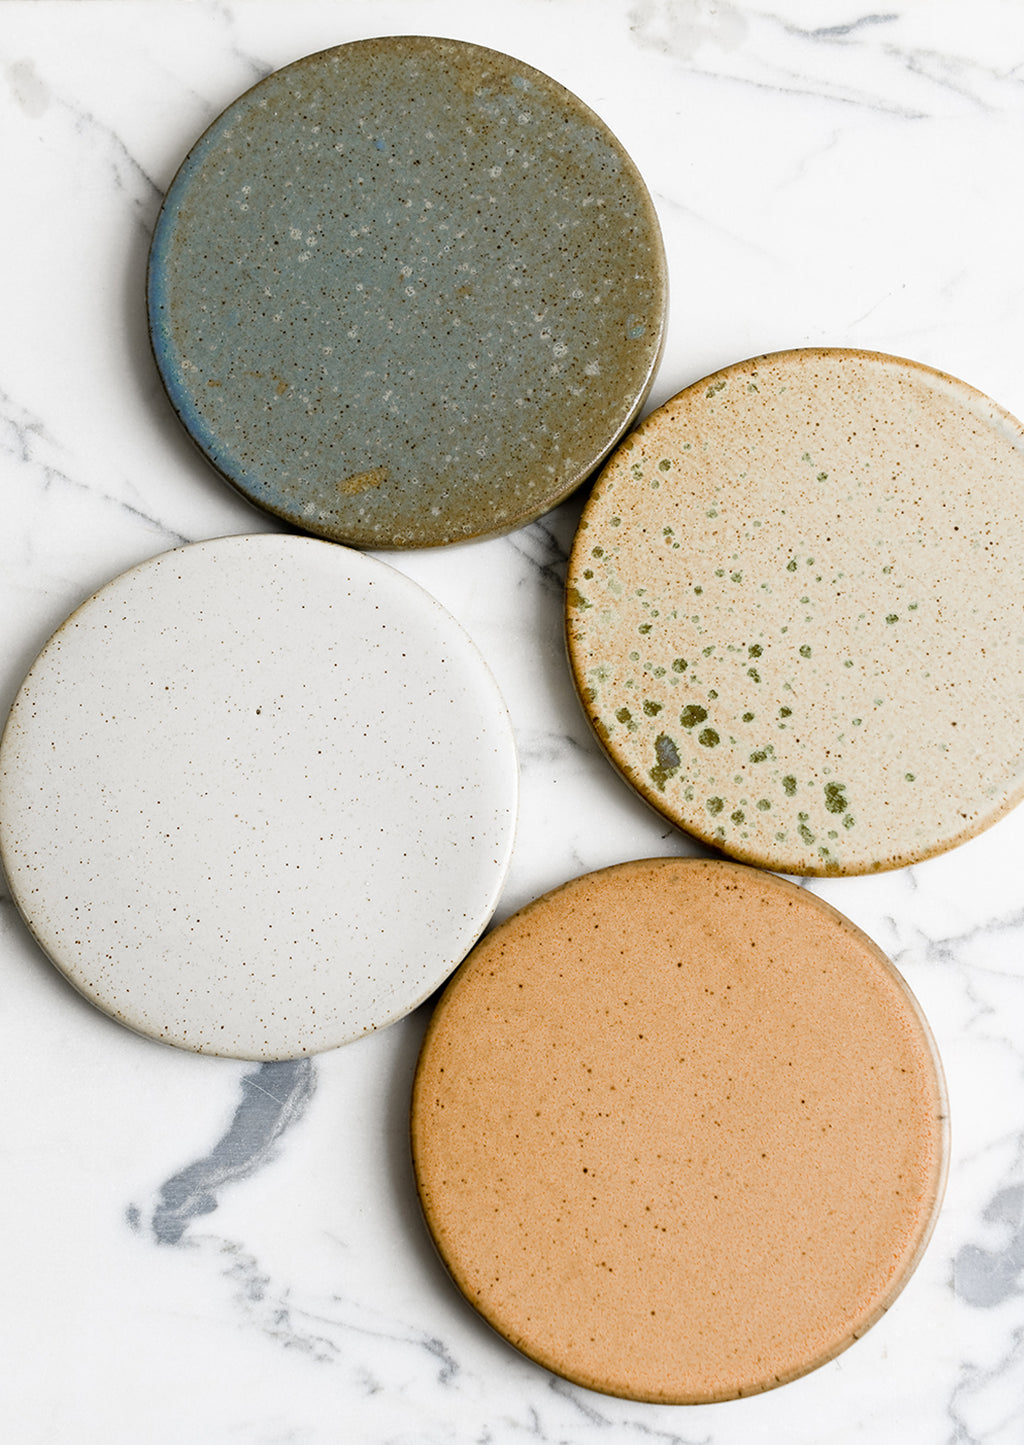 1: A set of four round ceramic coasters in earthy color mix.